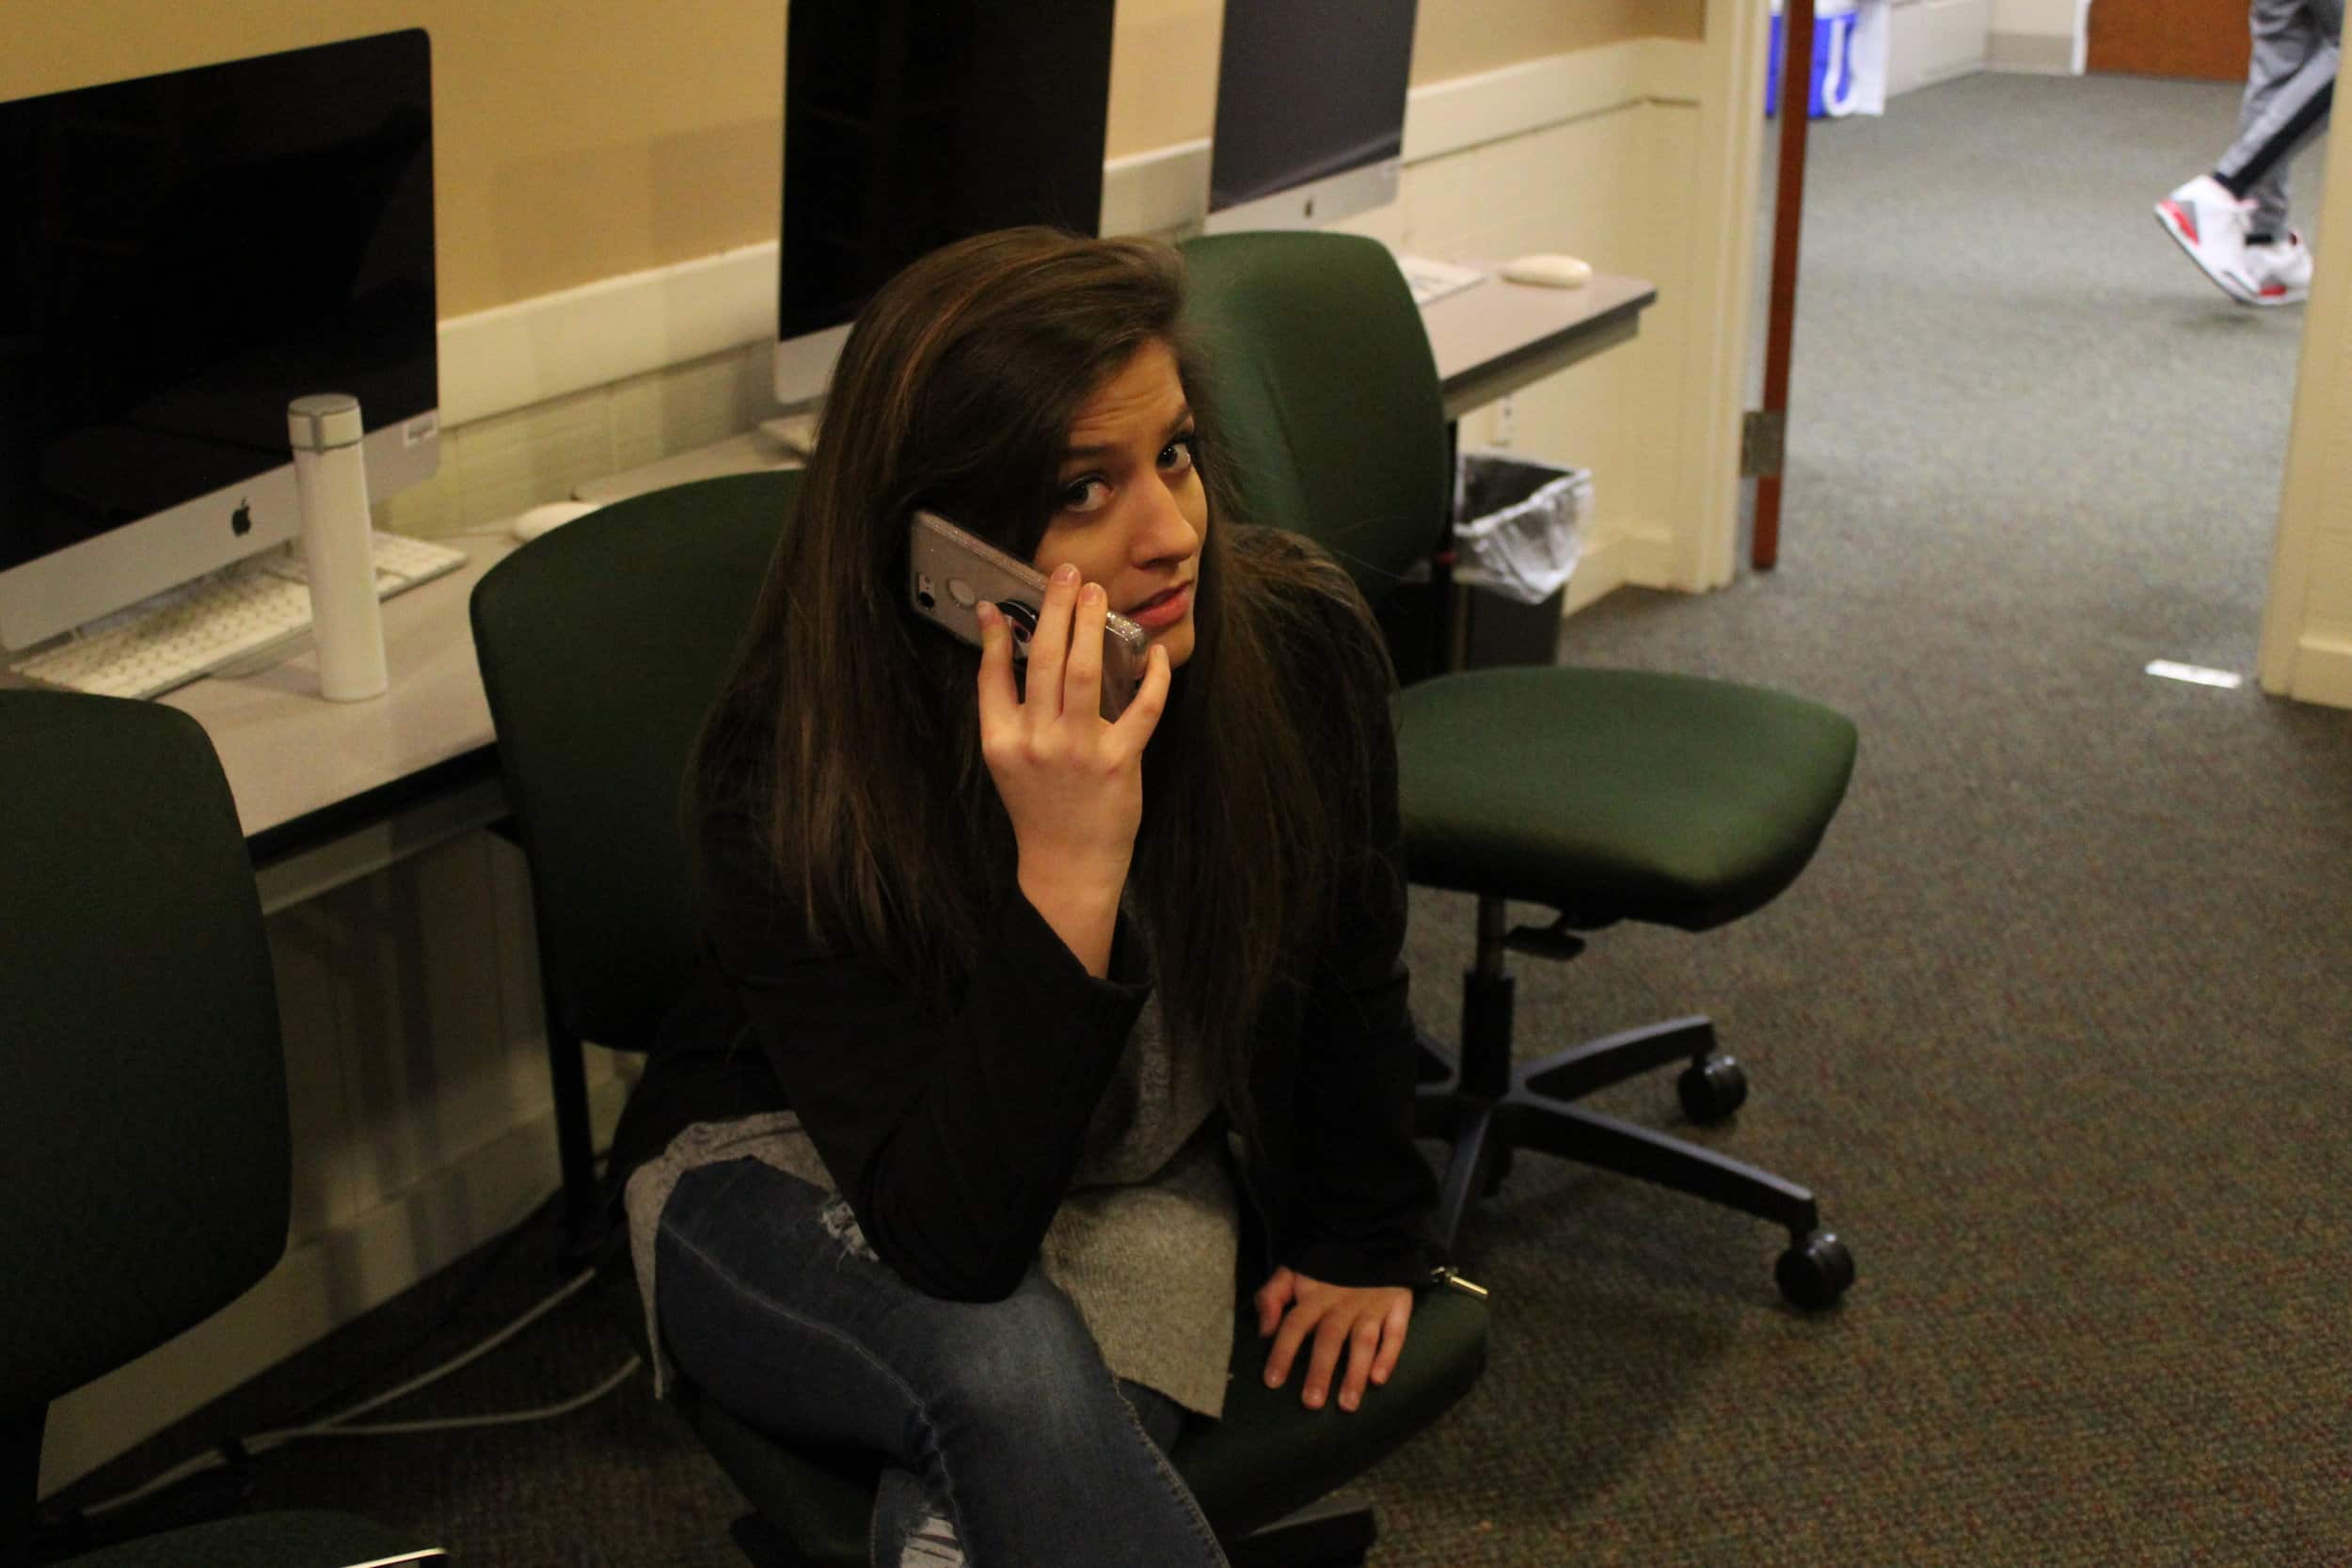 Sophomore, Vivian Wortkoetter, is caught on the phone talking to her friend.